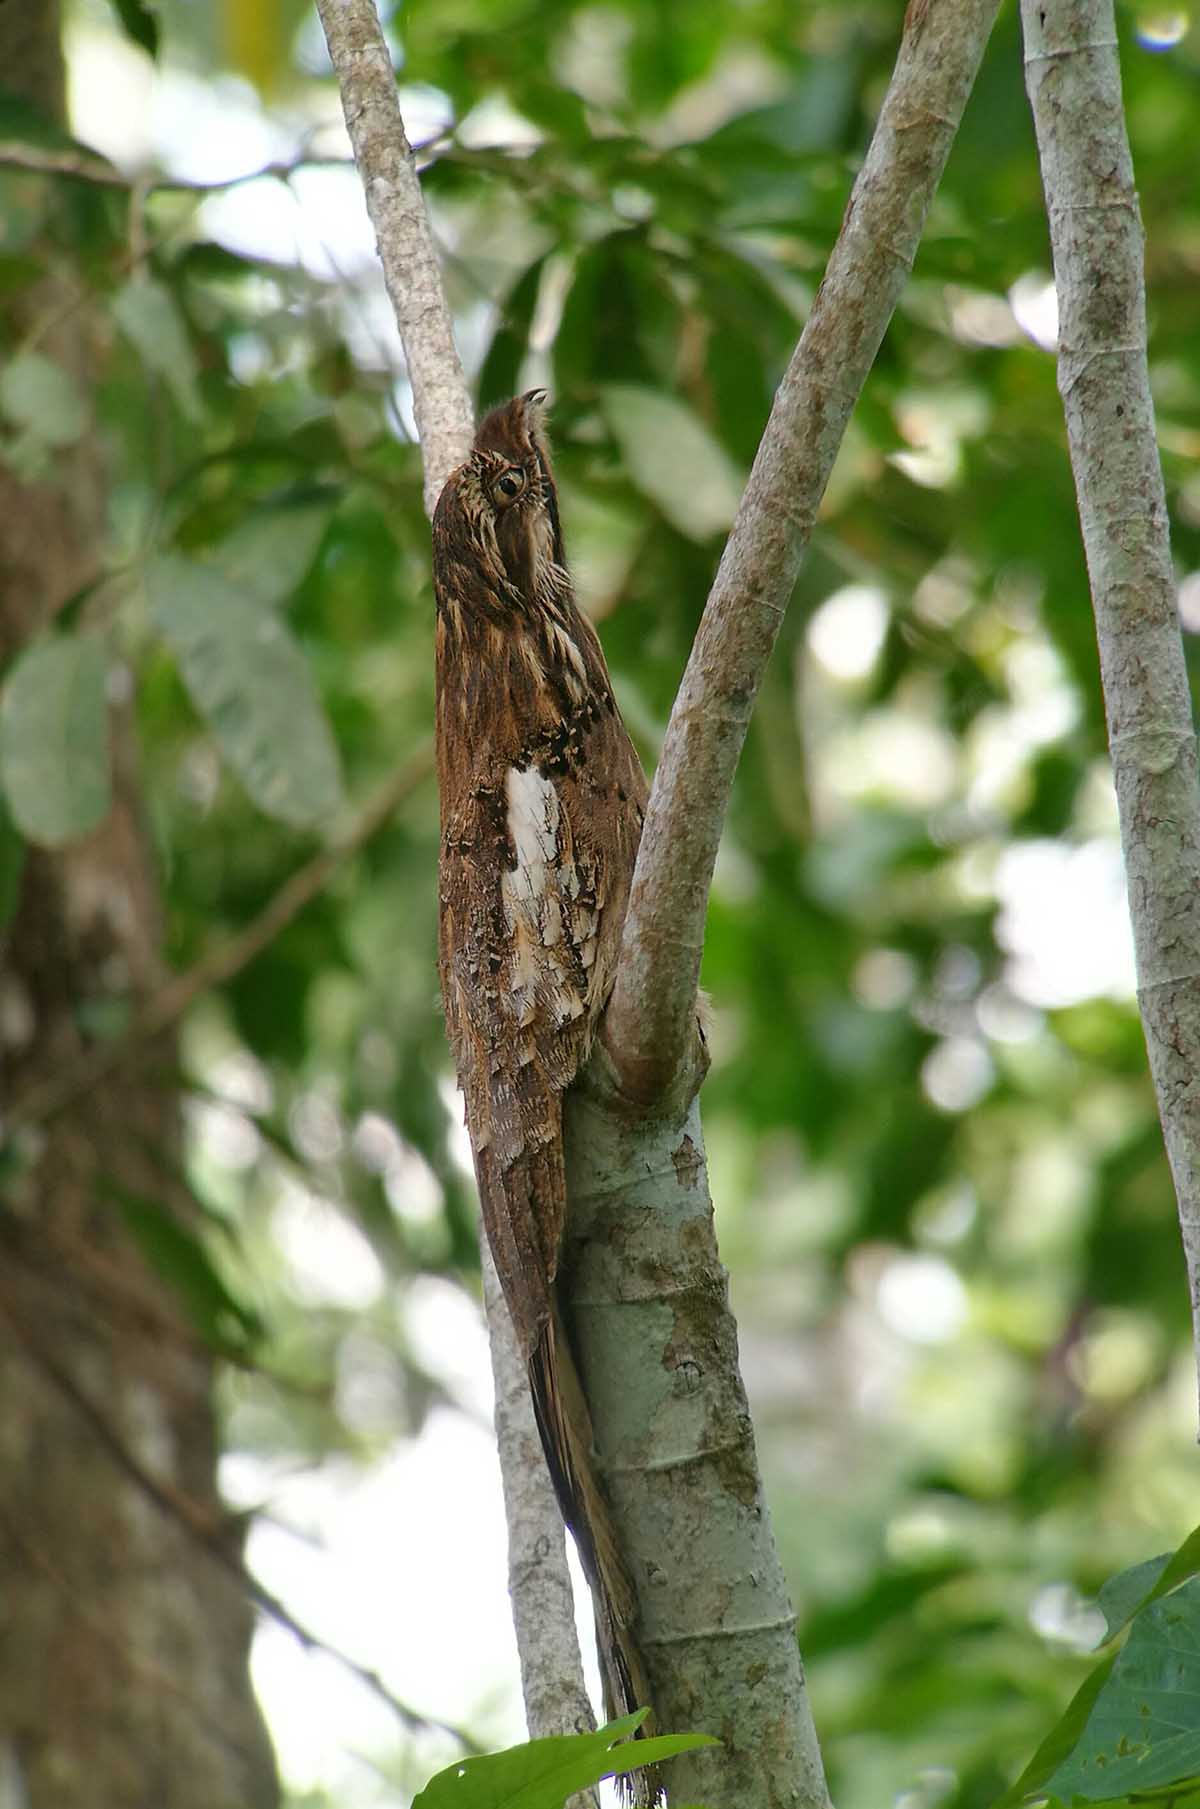 A potoo bird, with brown and white feathers, blends in with the tree it is standing on.